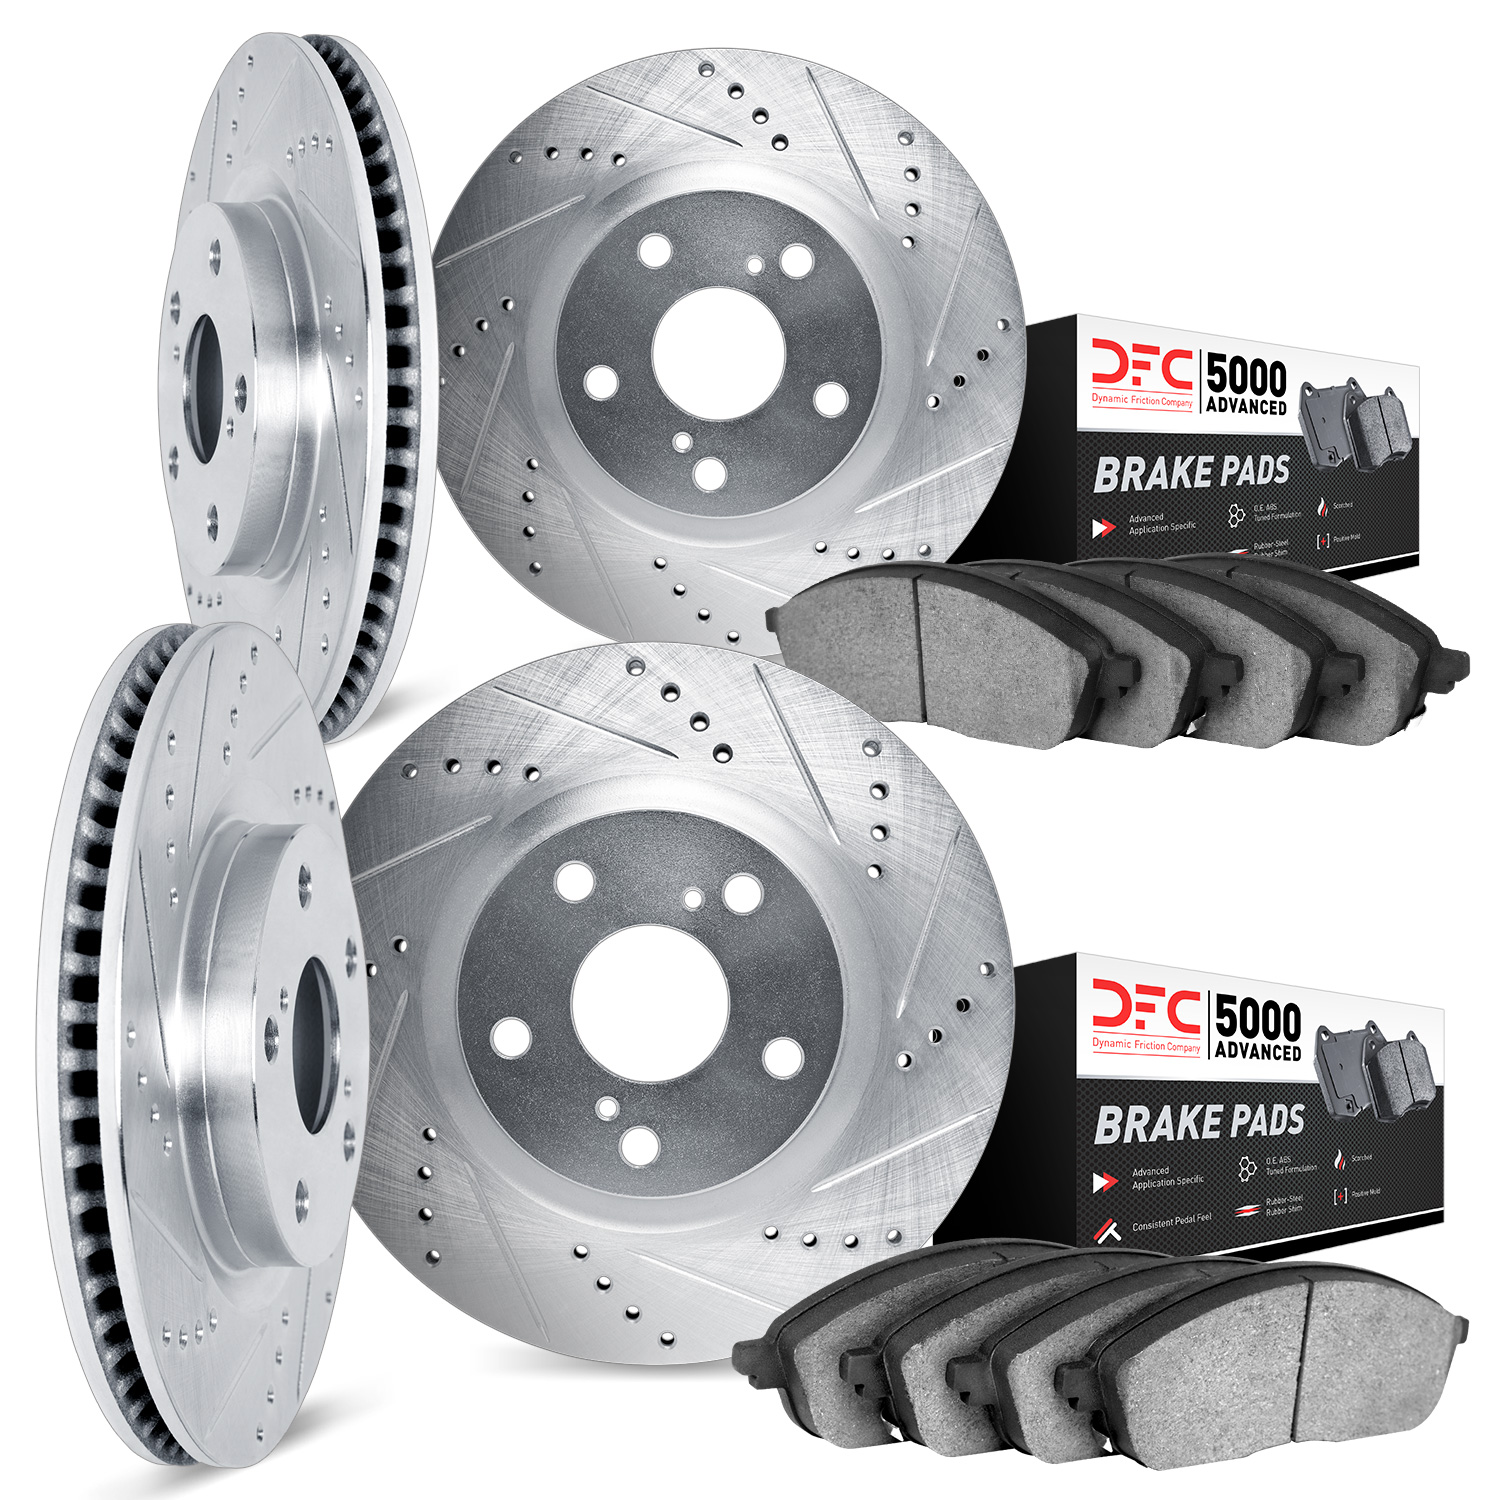 7504-74082 Drilled/Slotted Brake Rotors w/5000 Advanced Brake Pads Kit [Silver], 2008-2009 Audi/Volkswagen, Position: Front and